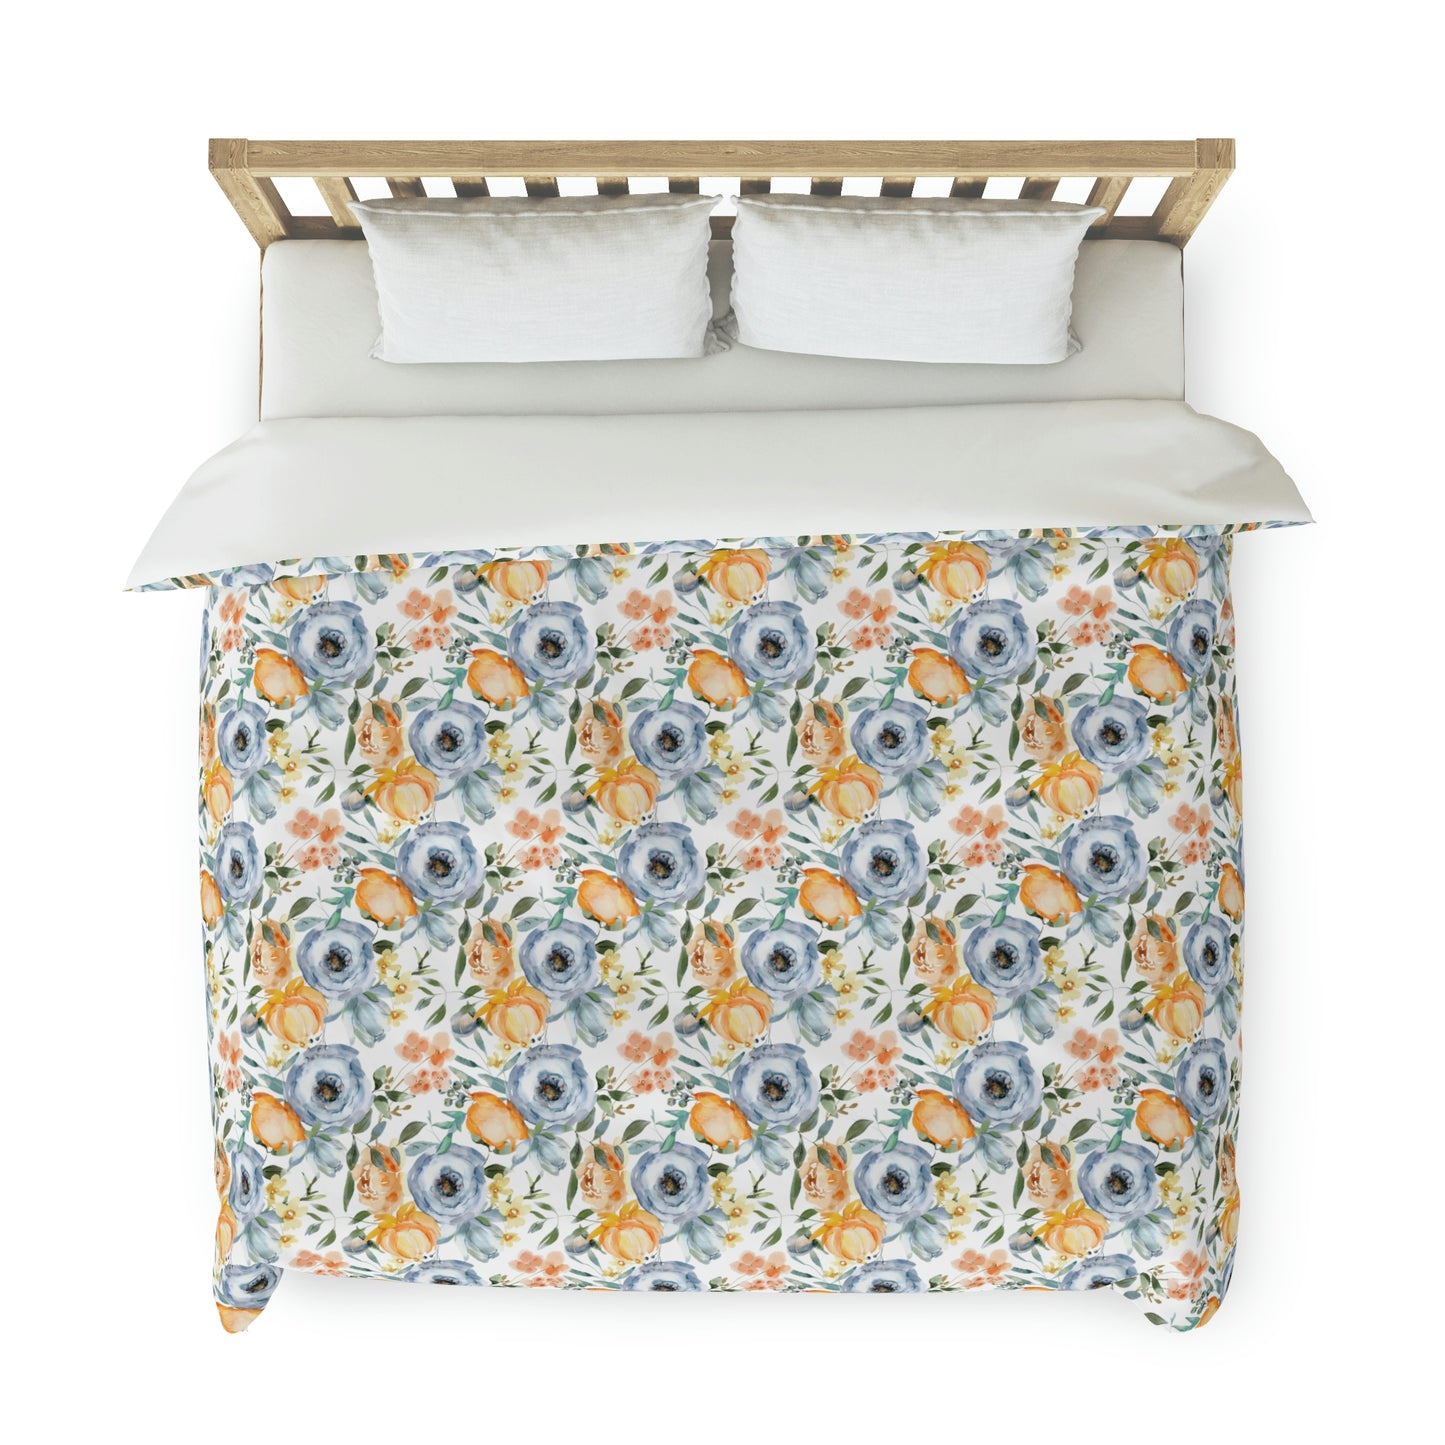 Mellow Apricot Pastel Blue Floral Pattern Duvet Cover lying on a bed, microfiber duvet cover bedroom accent